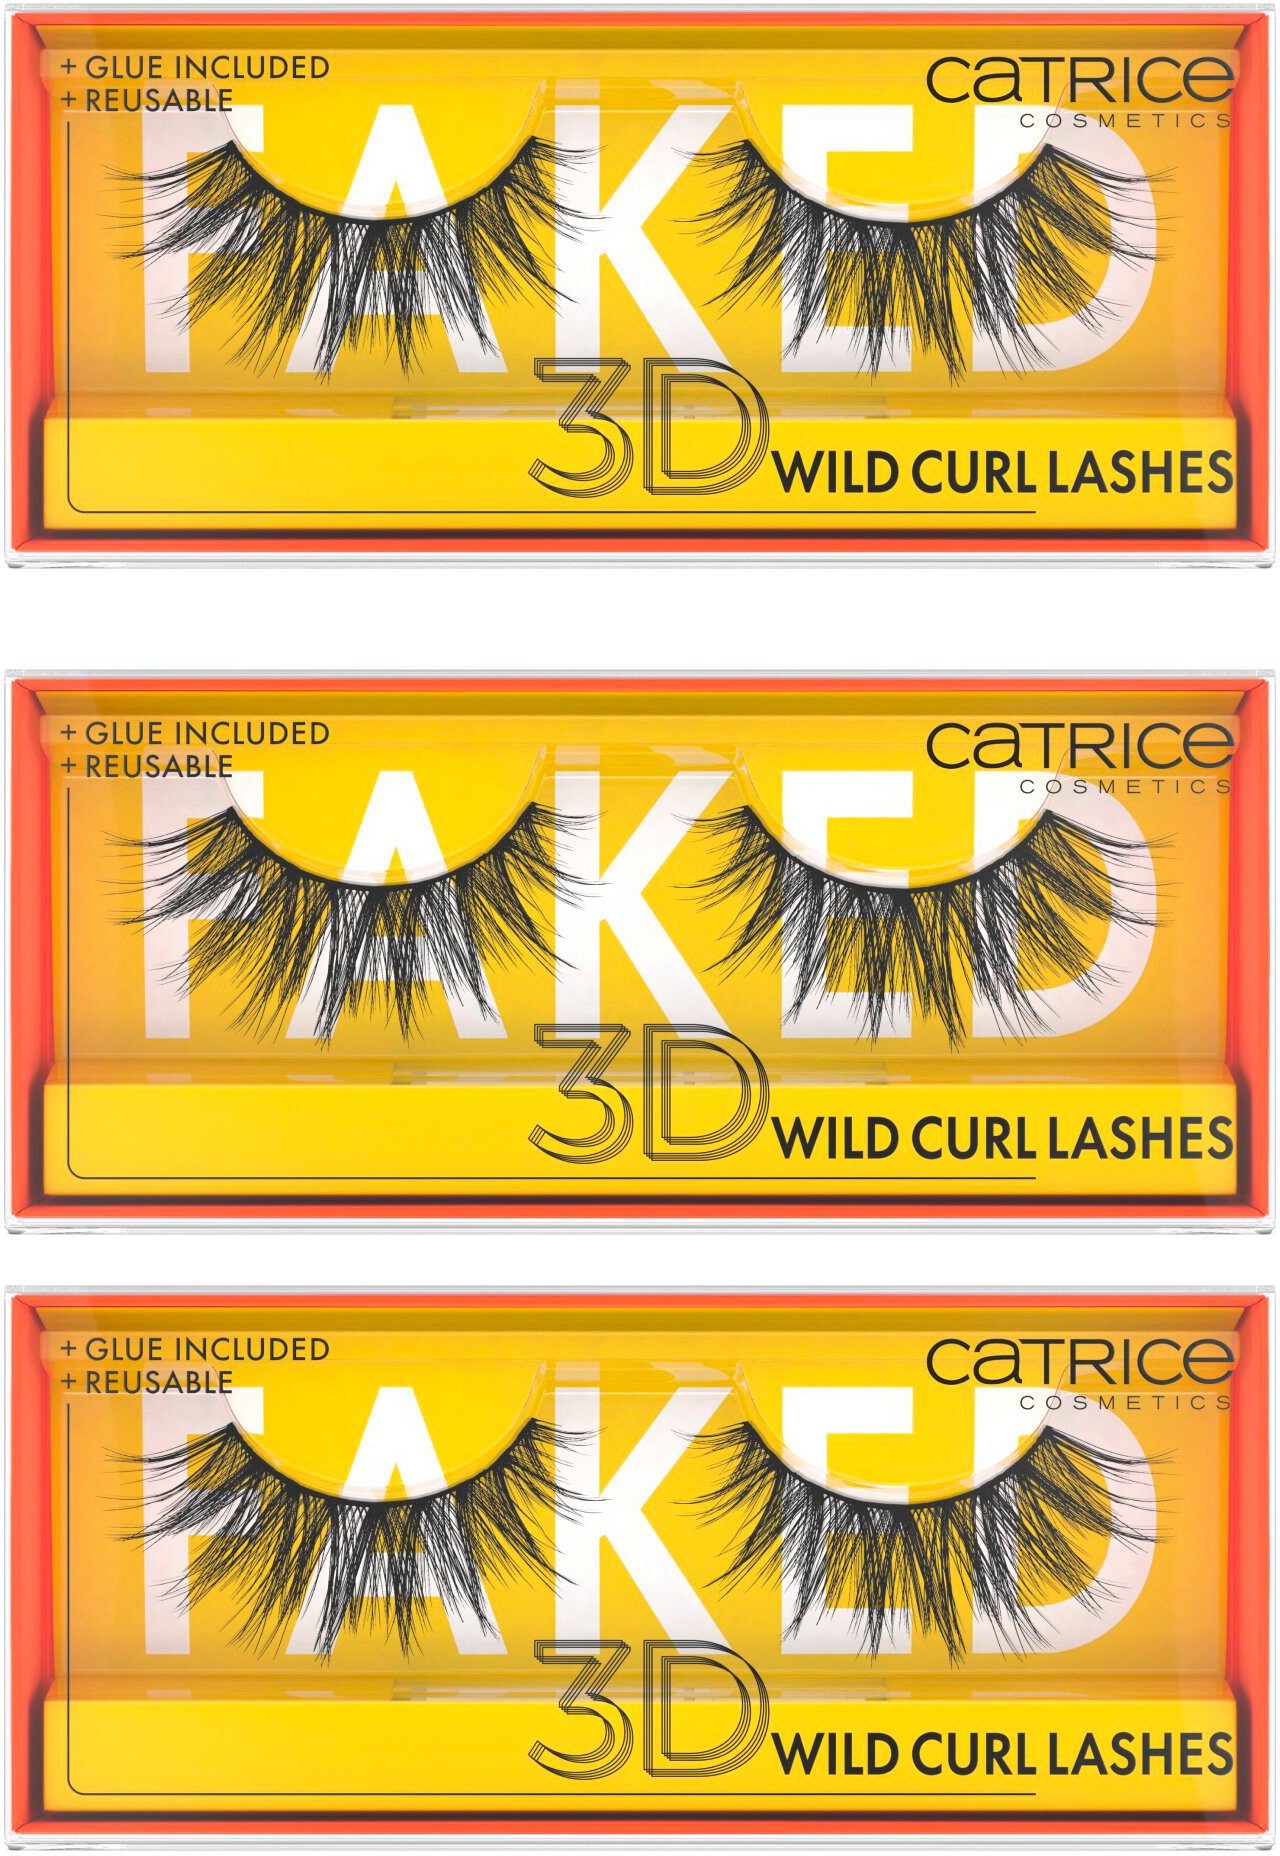 Catrice Bandwimpern Faked 3D Curl Set, Lashes, 3 Wild